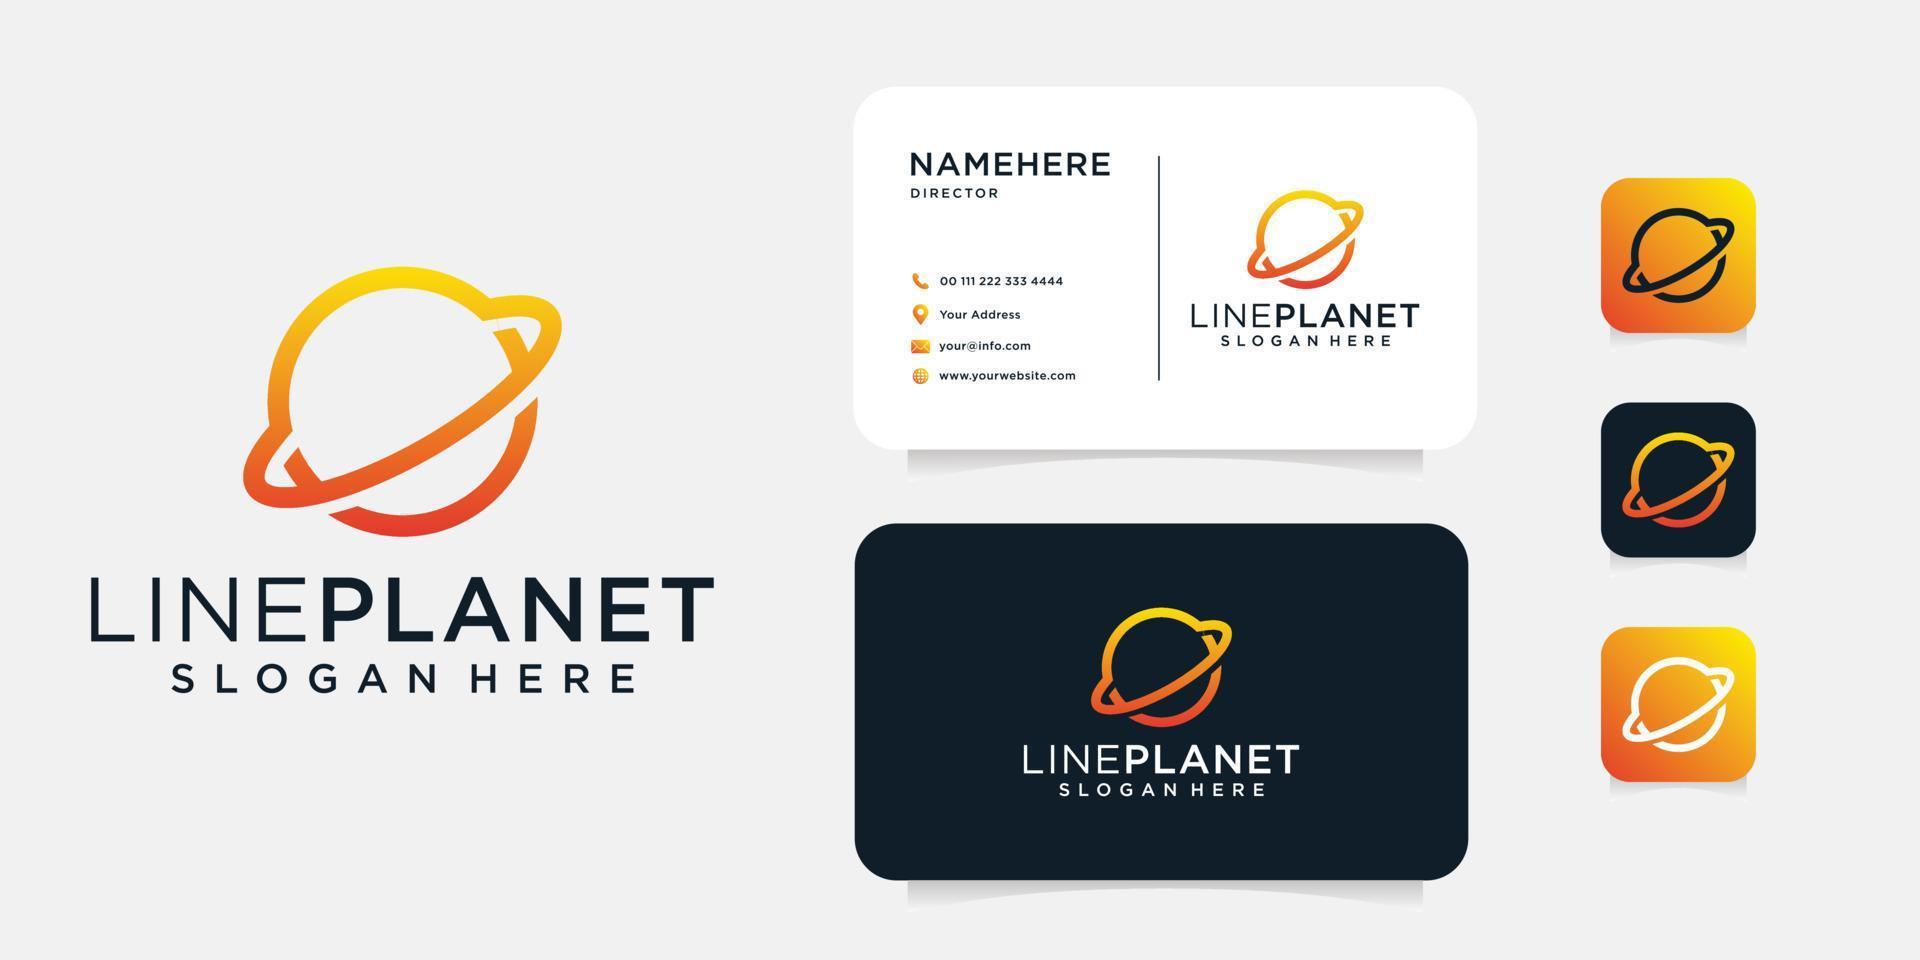 Vector logo design which depicts a planet against which circle ring